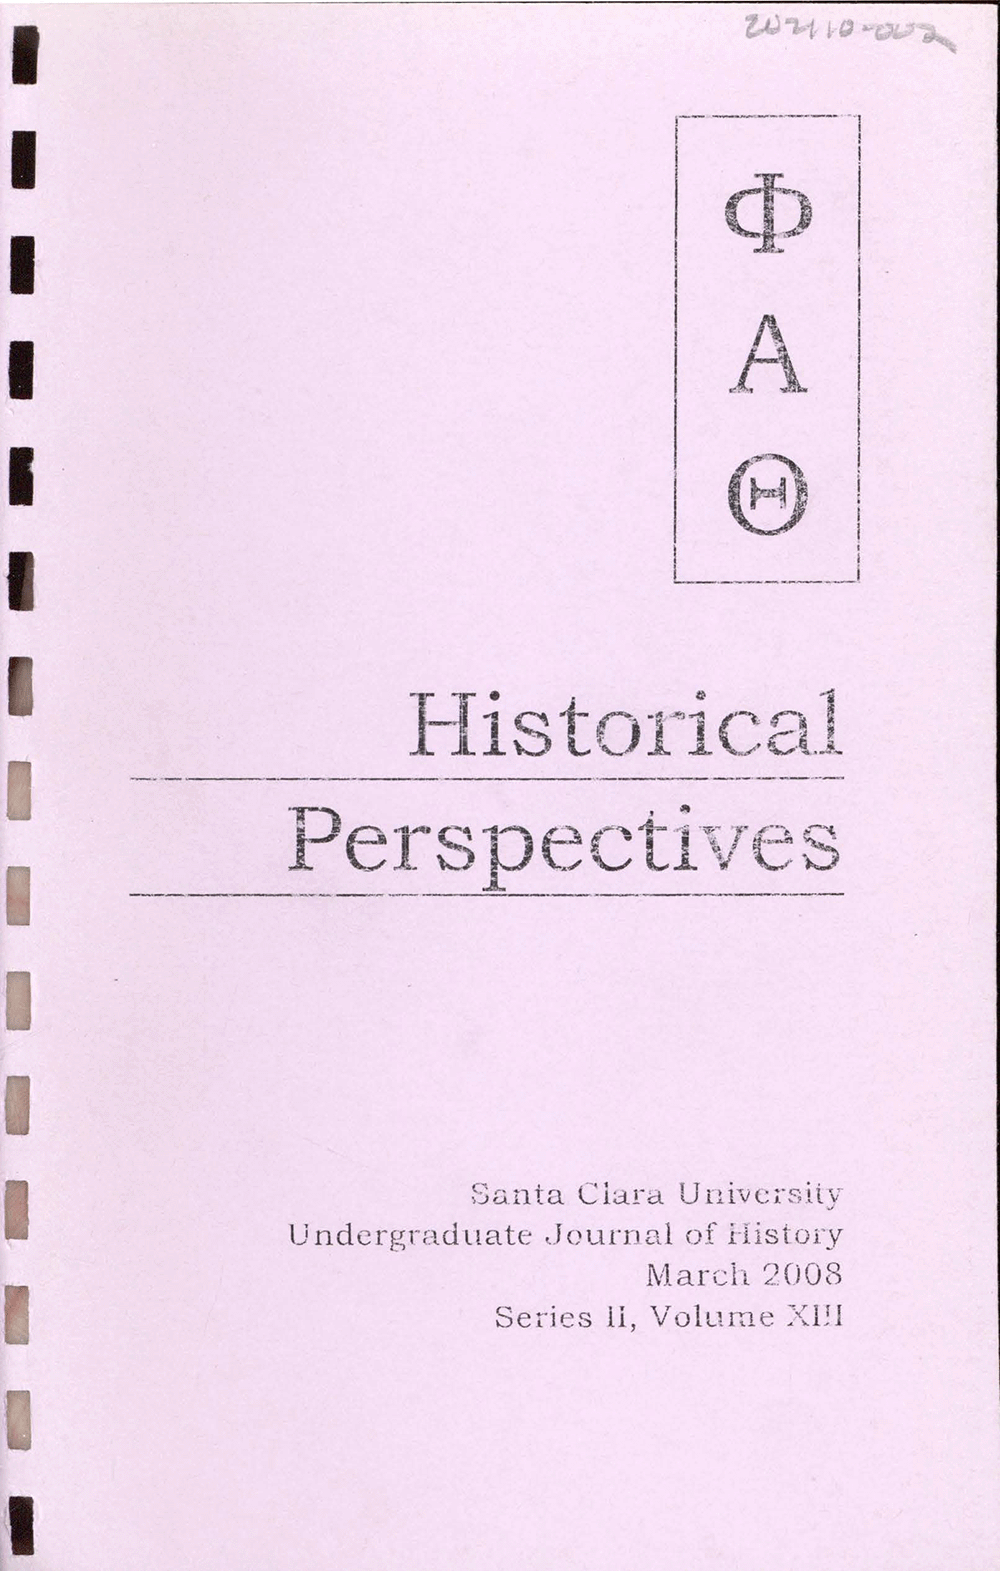 Historical Perspectives 2008, volume 13